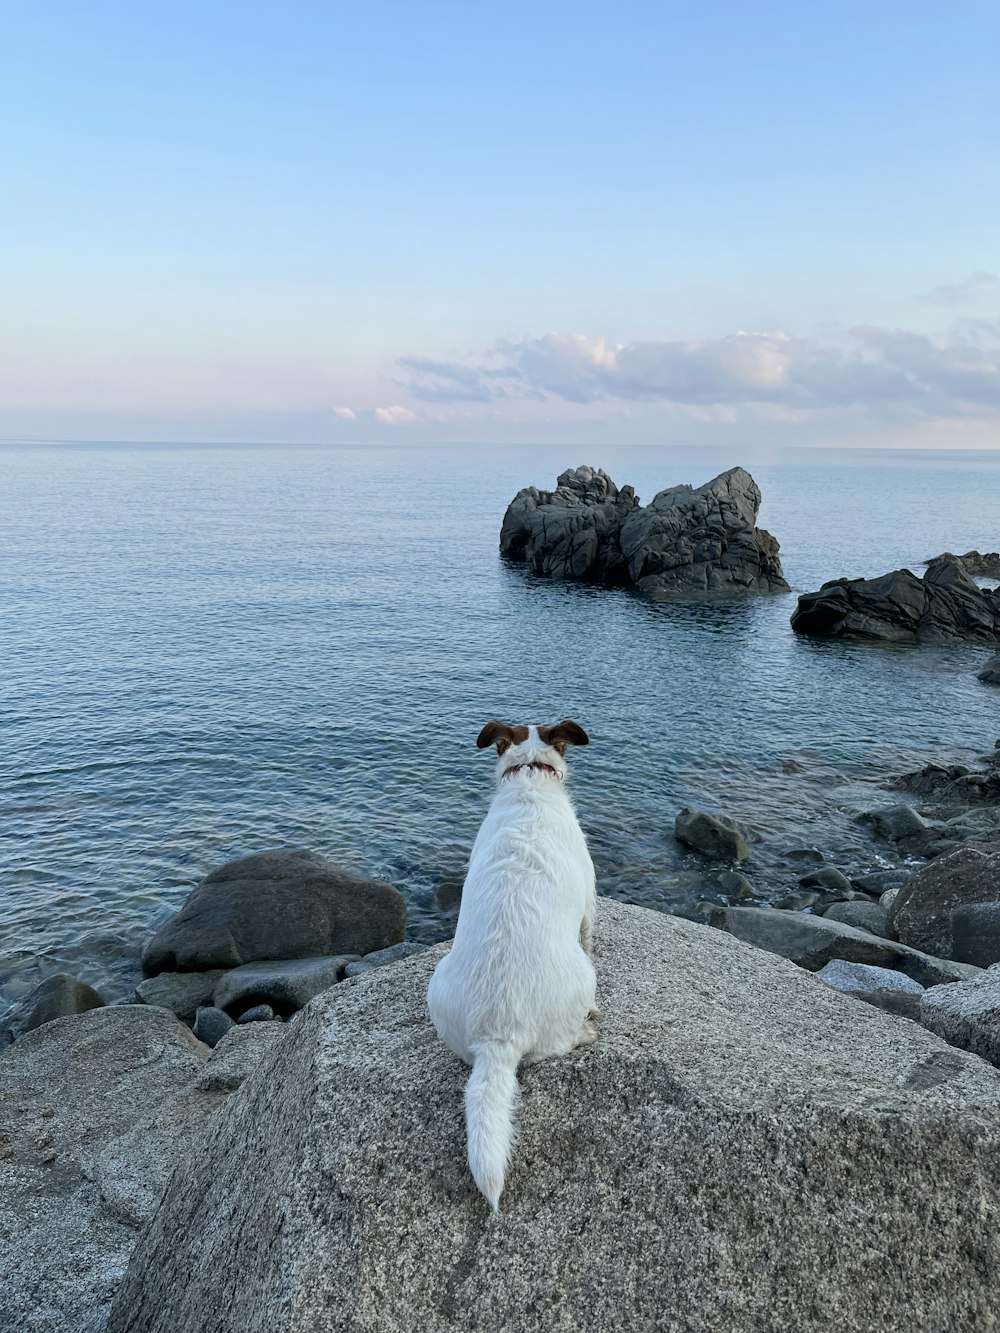 a dog sitting on a rock by the water